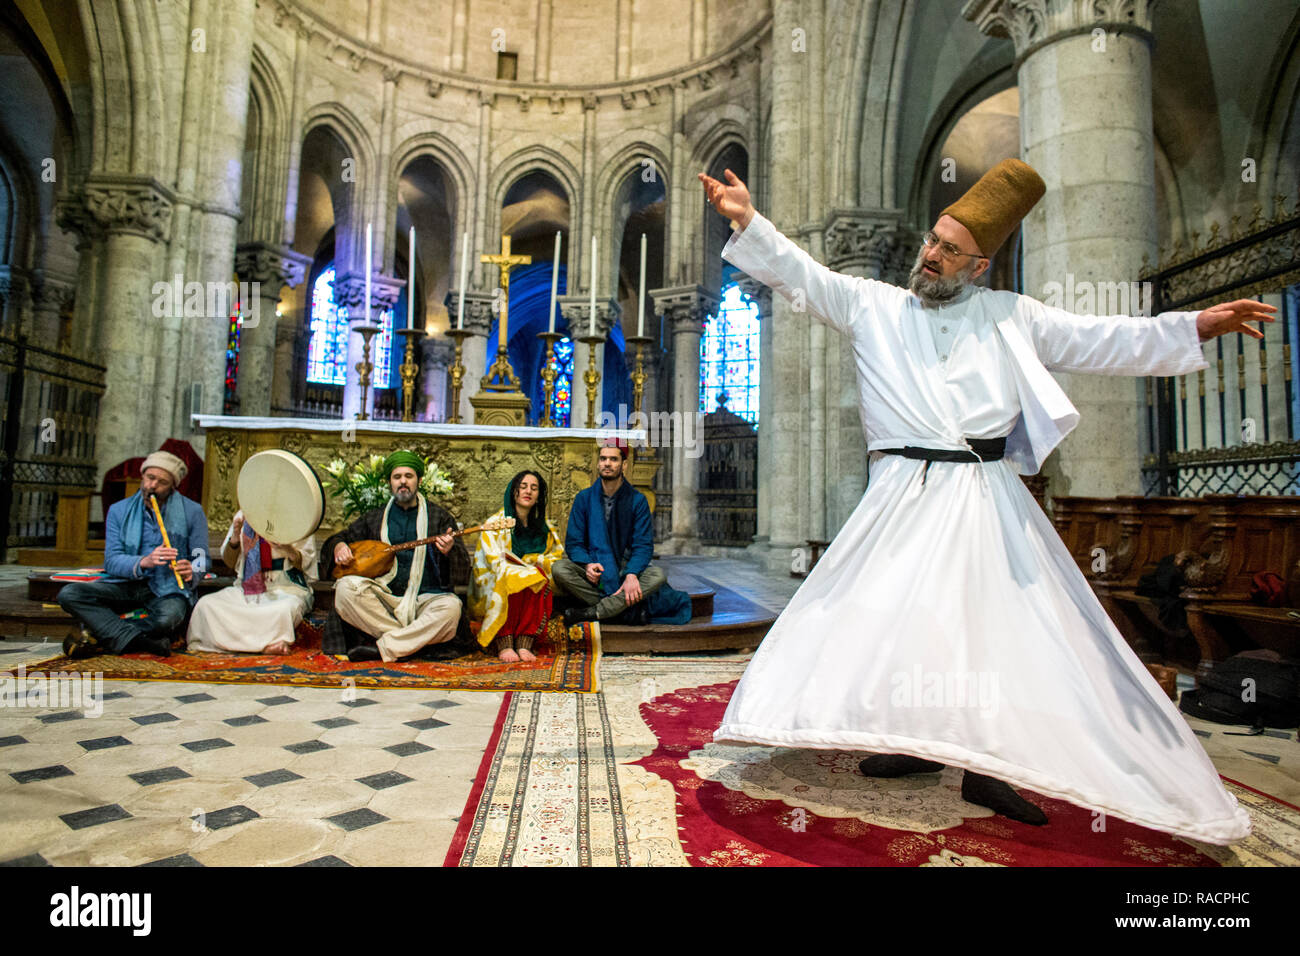 Sufi music band and Whirling Dervish at Sufi Muslim wedding in St. Nicolas's Catholic church, Blois, Loir-et-Cher, France, Europe Stock Photo